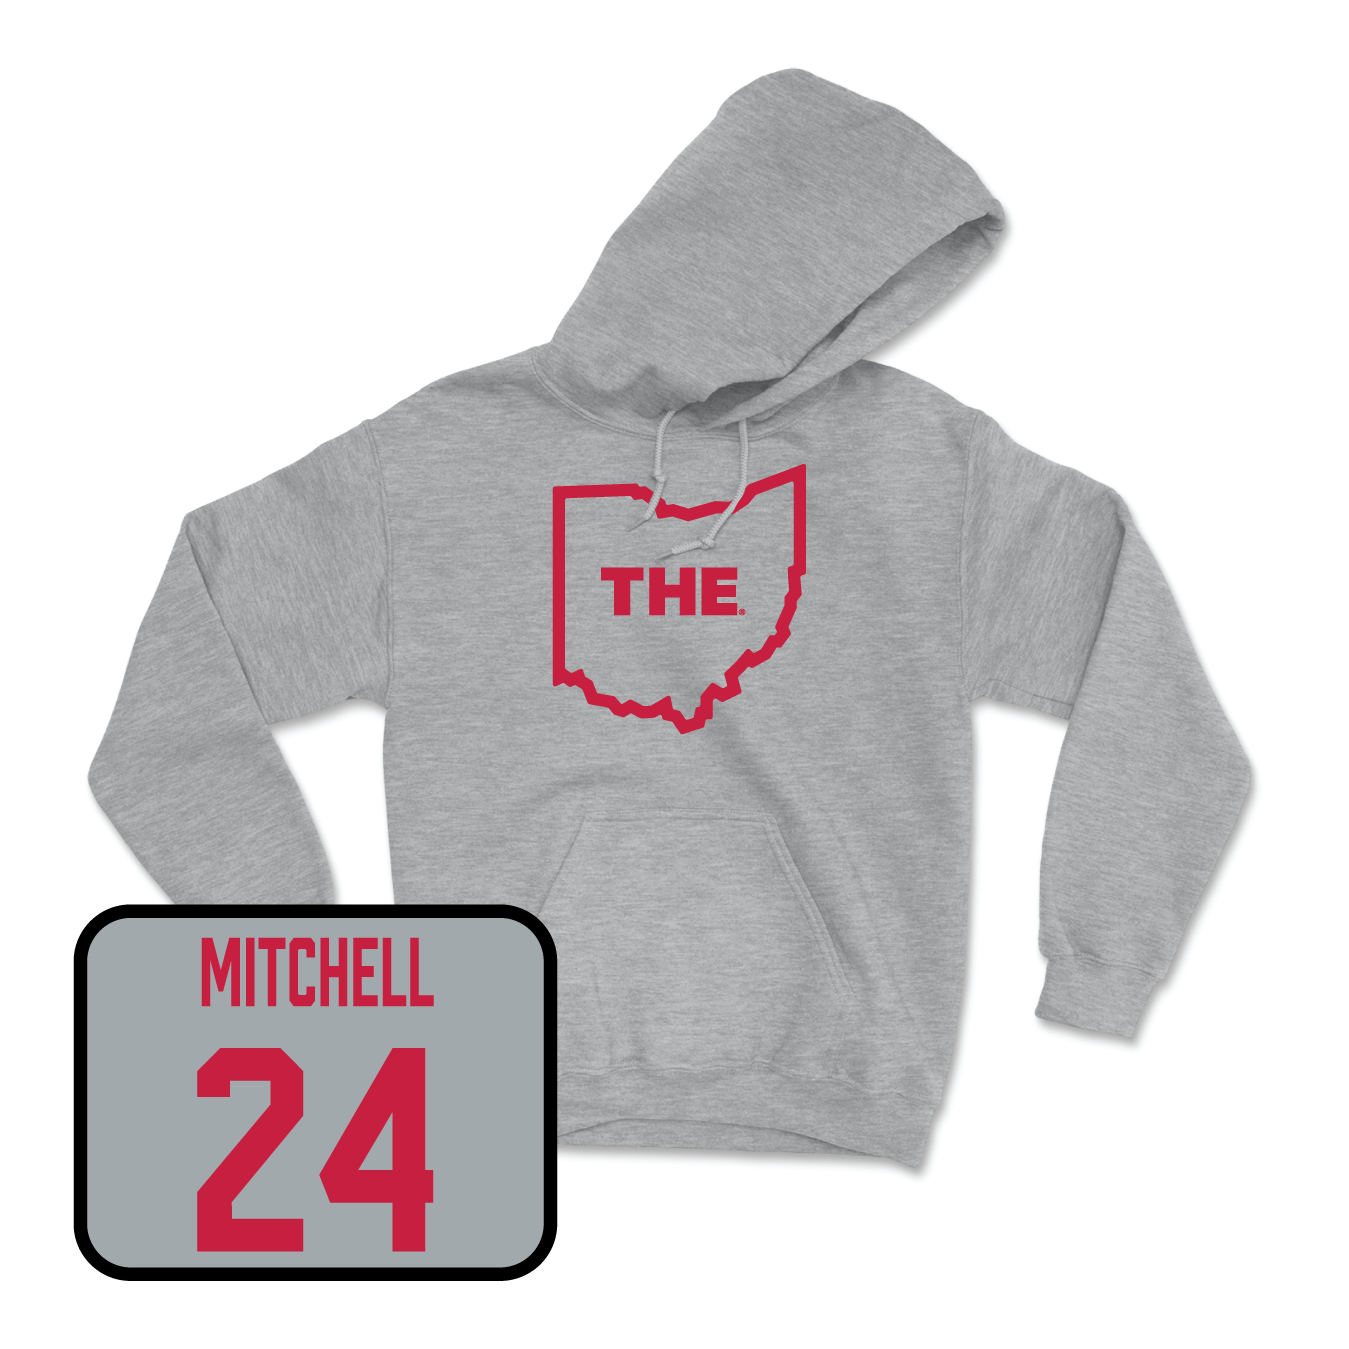 Sport Grey Men's Lacrosse The Hoodie 2 Youth Small / Connor Mitchell | #24